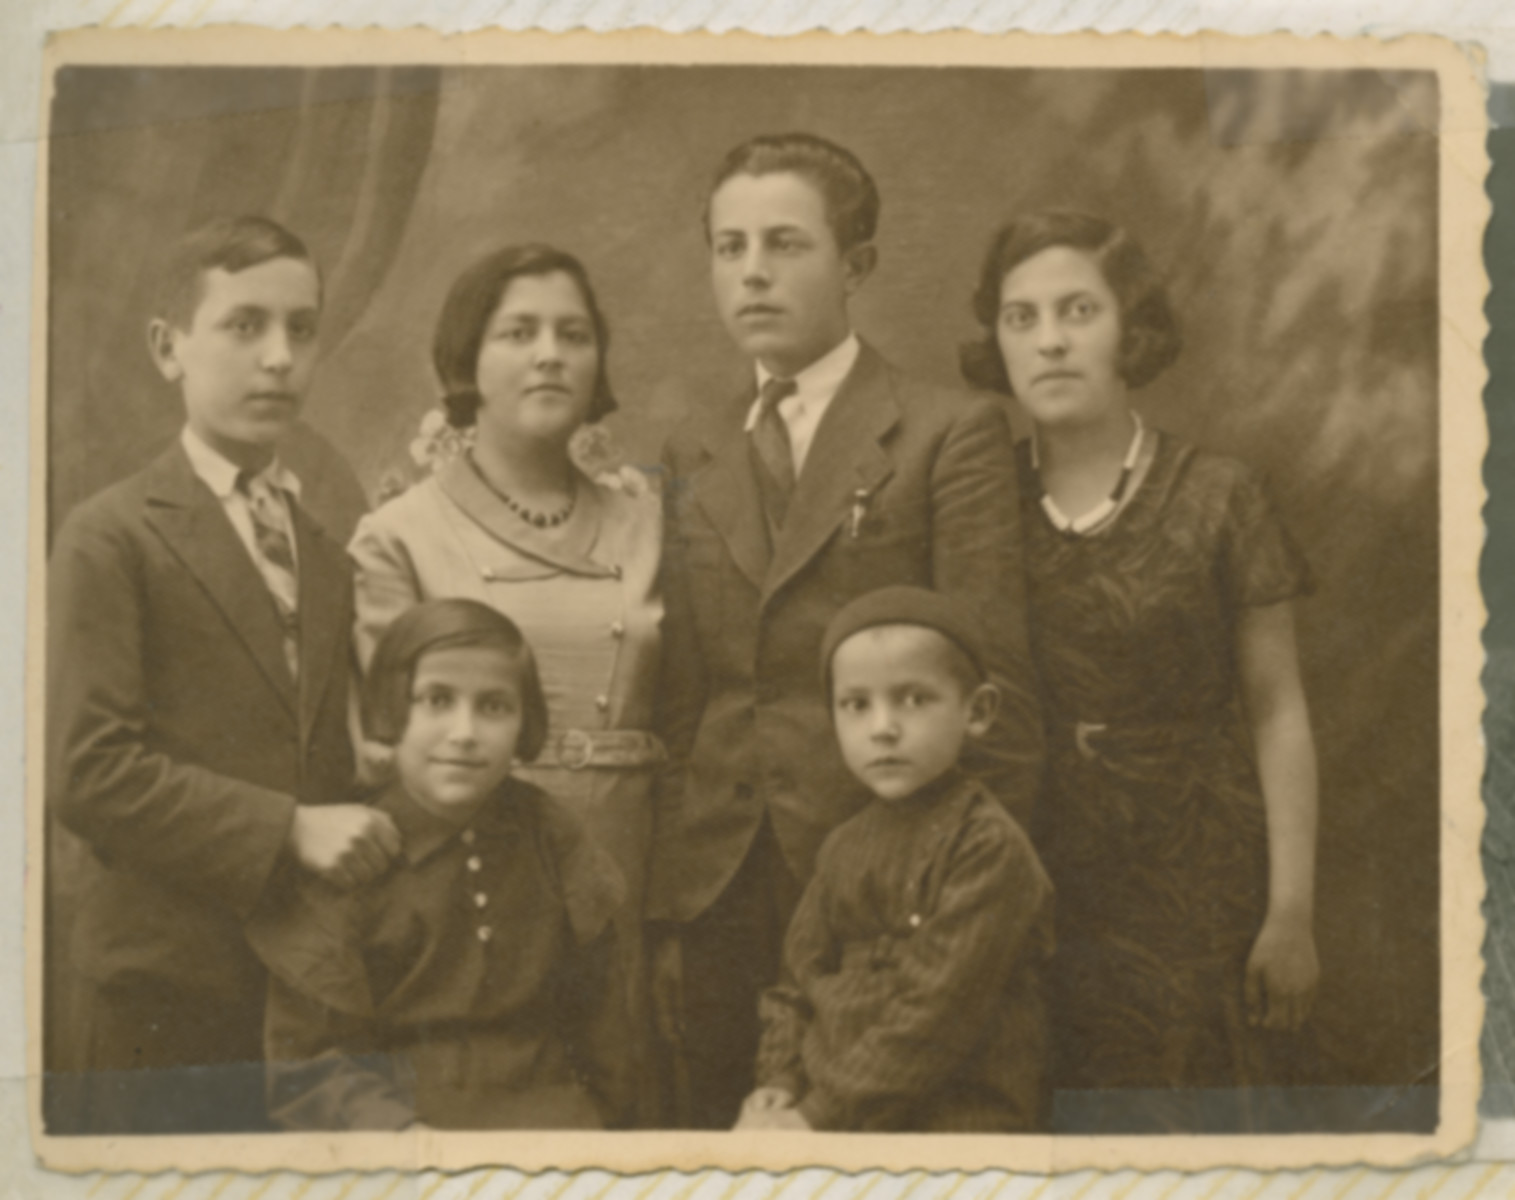 Prewar family photo of the Reichental family.

Moishe (Marian) Reichental is standing second from the right. Also pictured are his siblings Max, Rafael, Pesa, Rachela and Mila. Pesa and Rafael are the youngest at the forefront.  Rachela is flanked by Max and Marian.